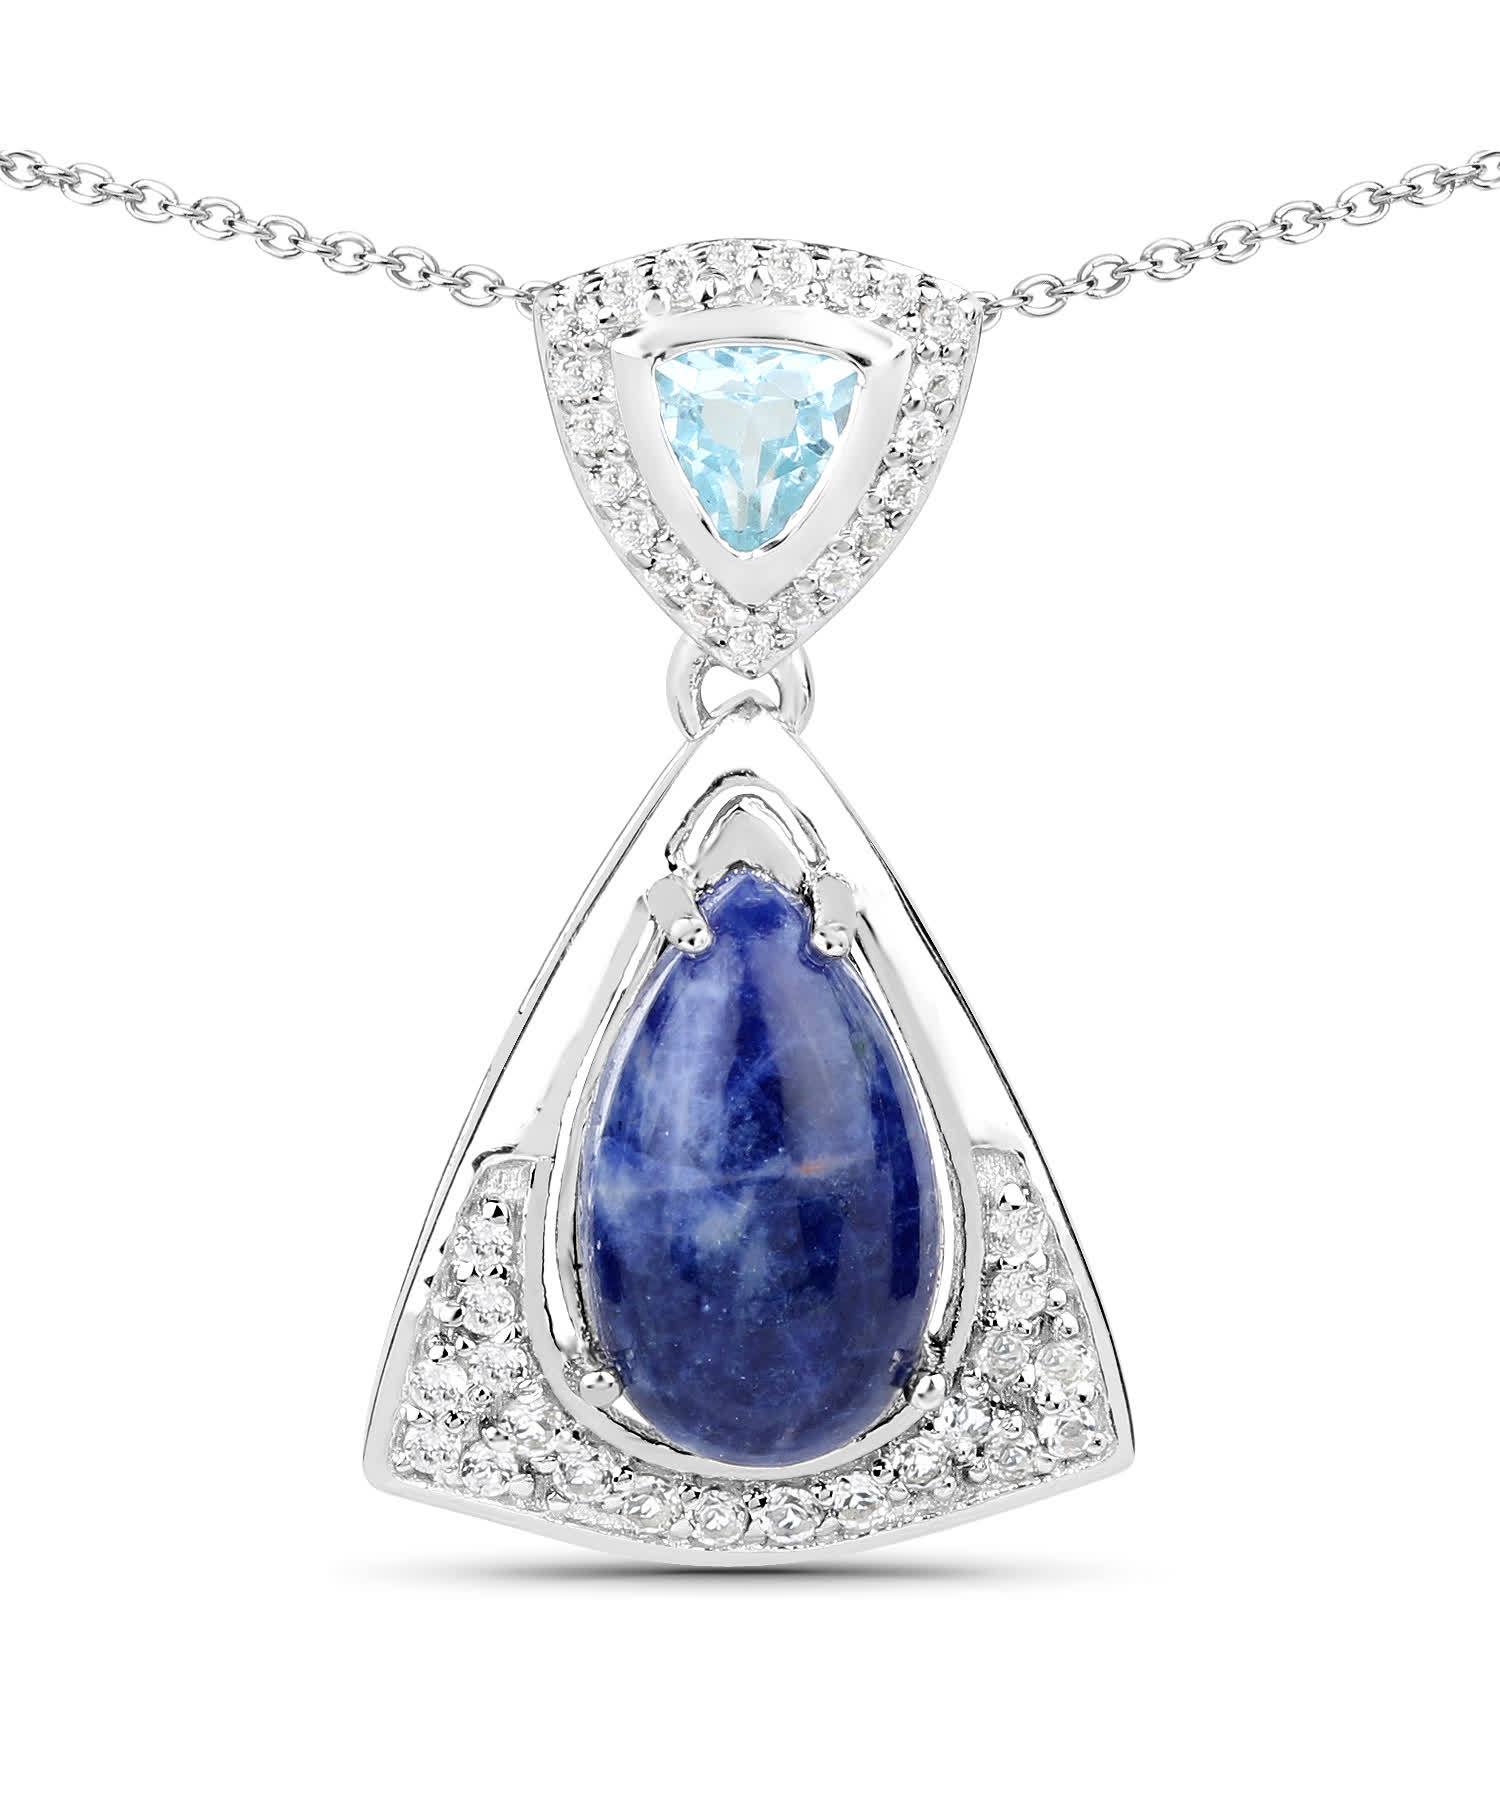 2.34ctw Natural Aventurine and Topaz Rhodium Plated 925 Sterling Silver Triangle Pendant With Chain View 1